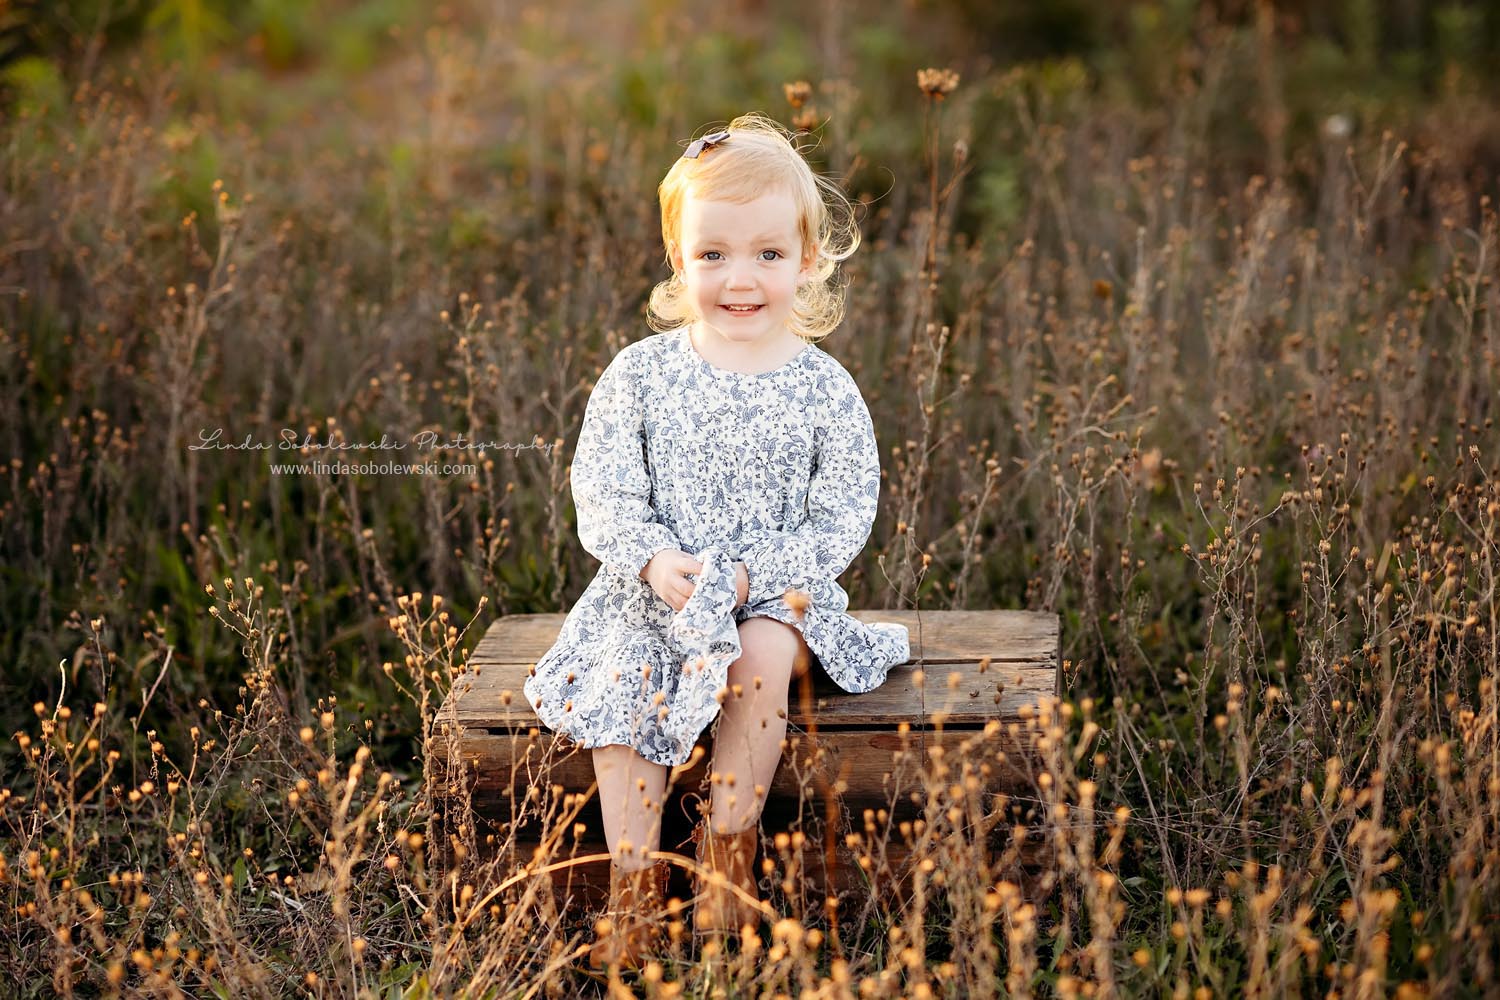 little girl with blonde hair sitting in the grass, CT Shoreline Family photographer